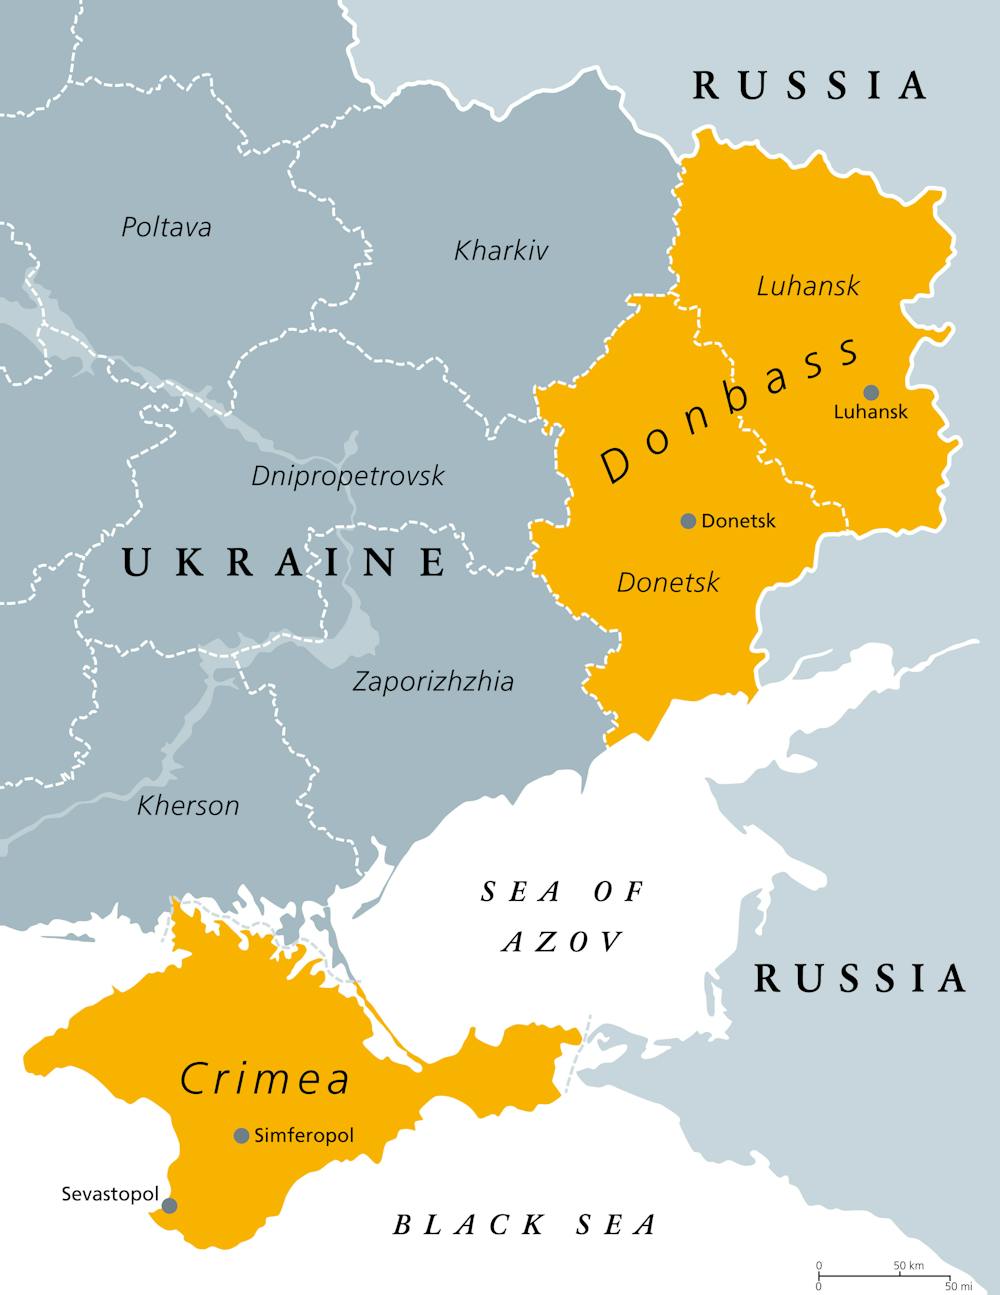 Ukraine: crisis between Russia and the west in the region has been brewing for 30 years